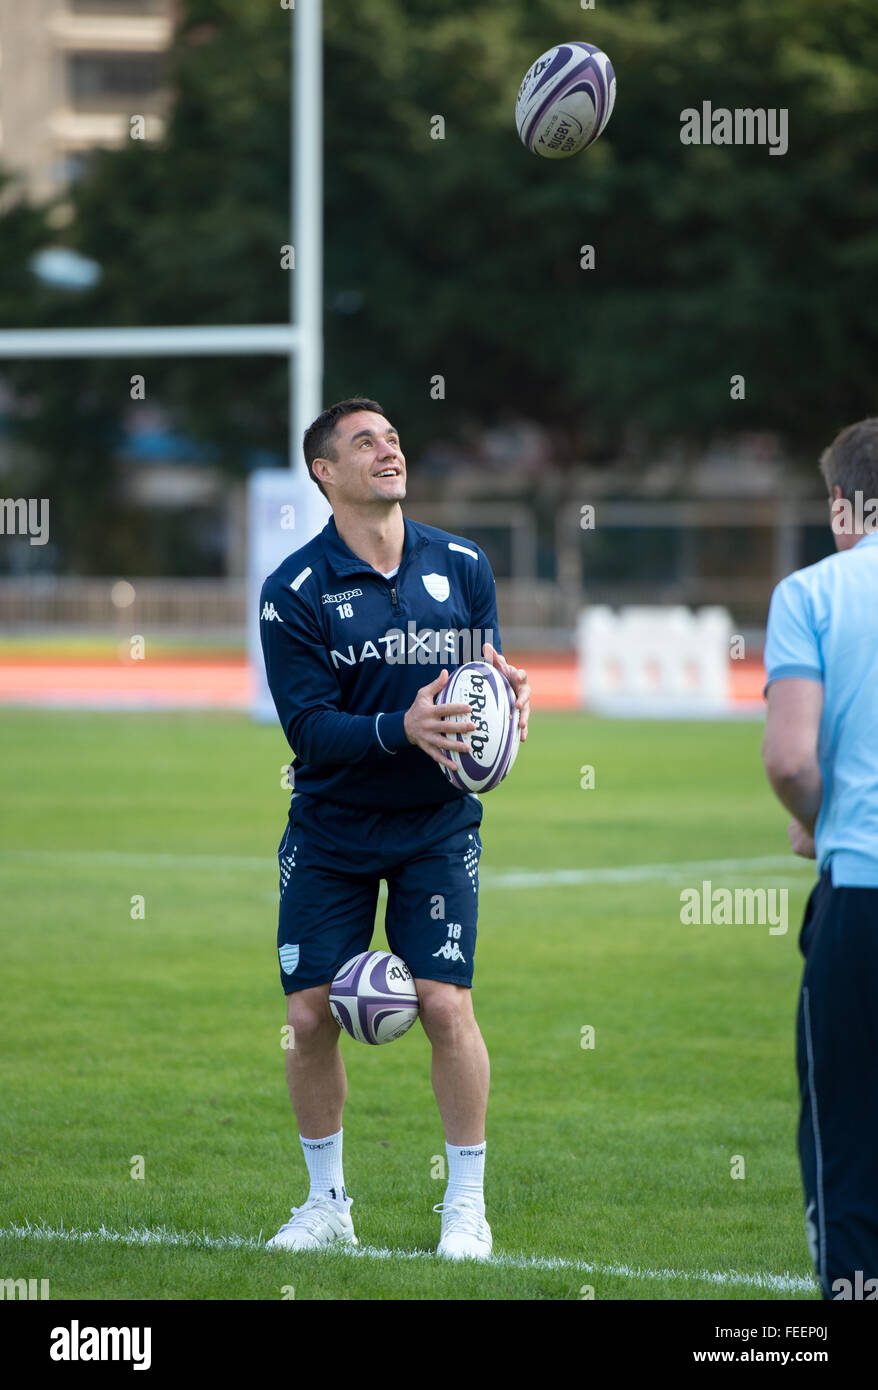 Hong Kong, Hong Kong S.A.R, China. 5th Feb, 2016. DAN CARTER of the French Rugby union team RACING 92's during last practice session ahead of their clash with New Zealand team, The Highlanders. Racing 92 take the chance to practise on the pitch they will play on in the upcoming match in Hong Kong. They are playing at Sui Sai Wan sports ground in Chai Wan. © Jayne Russell/ZUMA Wire/Alamy Live News Stock Photo